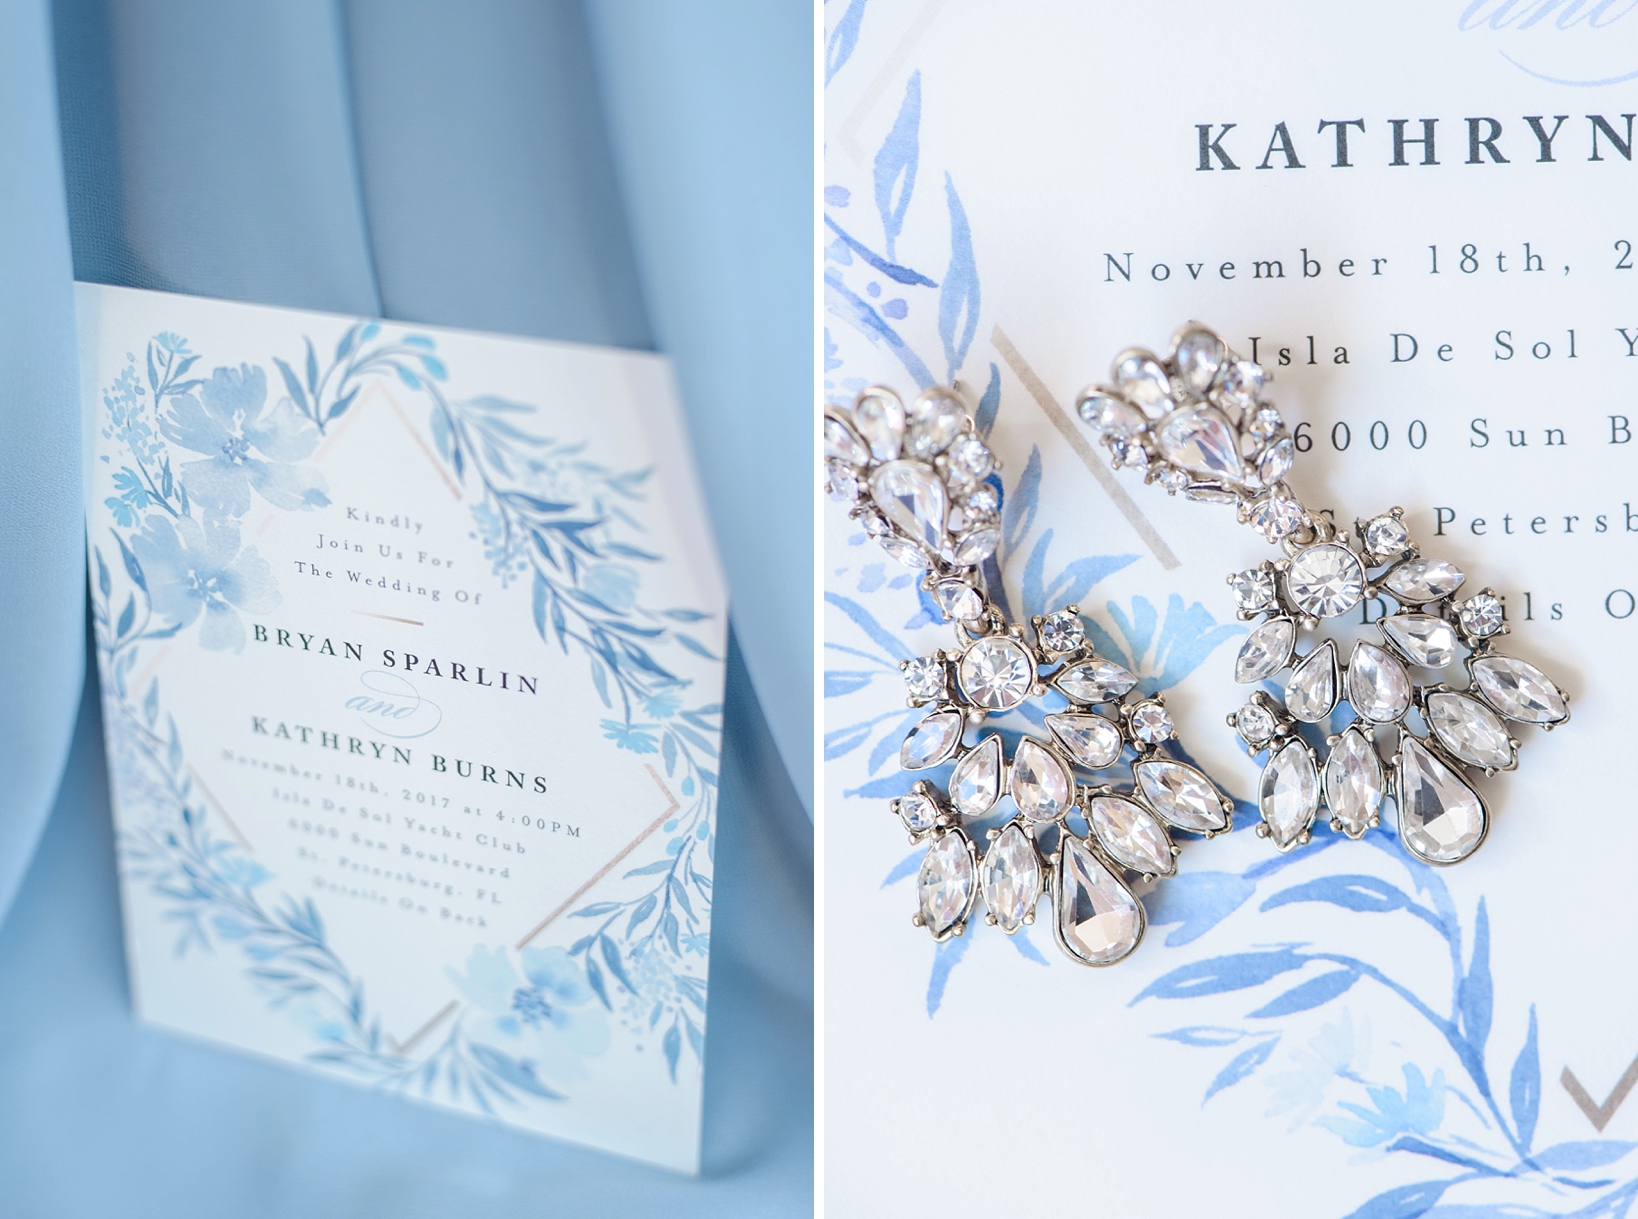 Invitation with diamond Bridal earrings against a bridesmaids dress